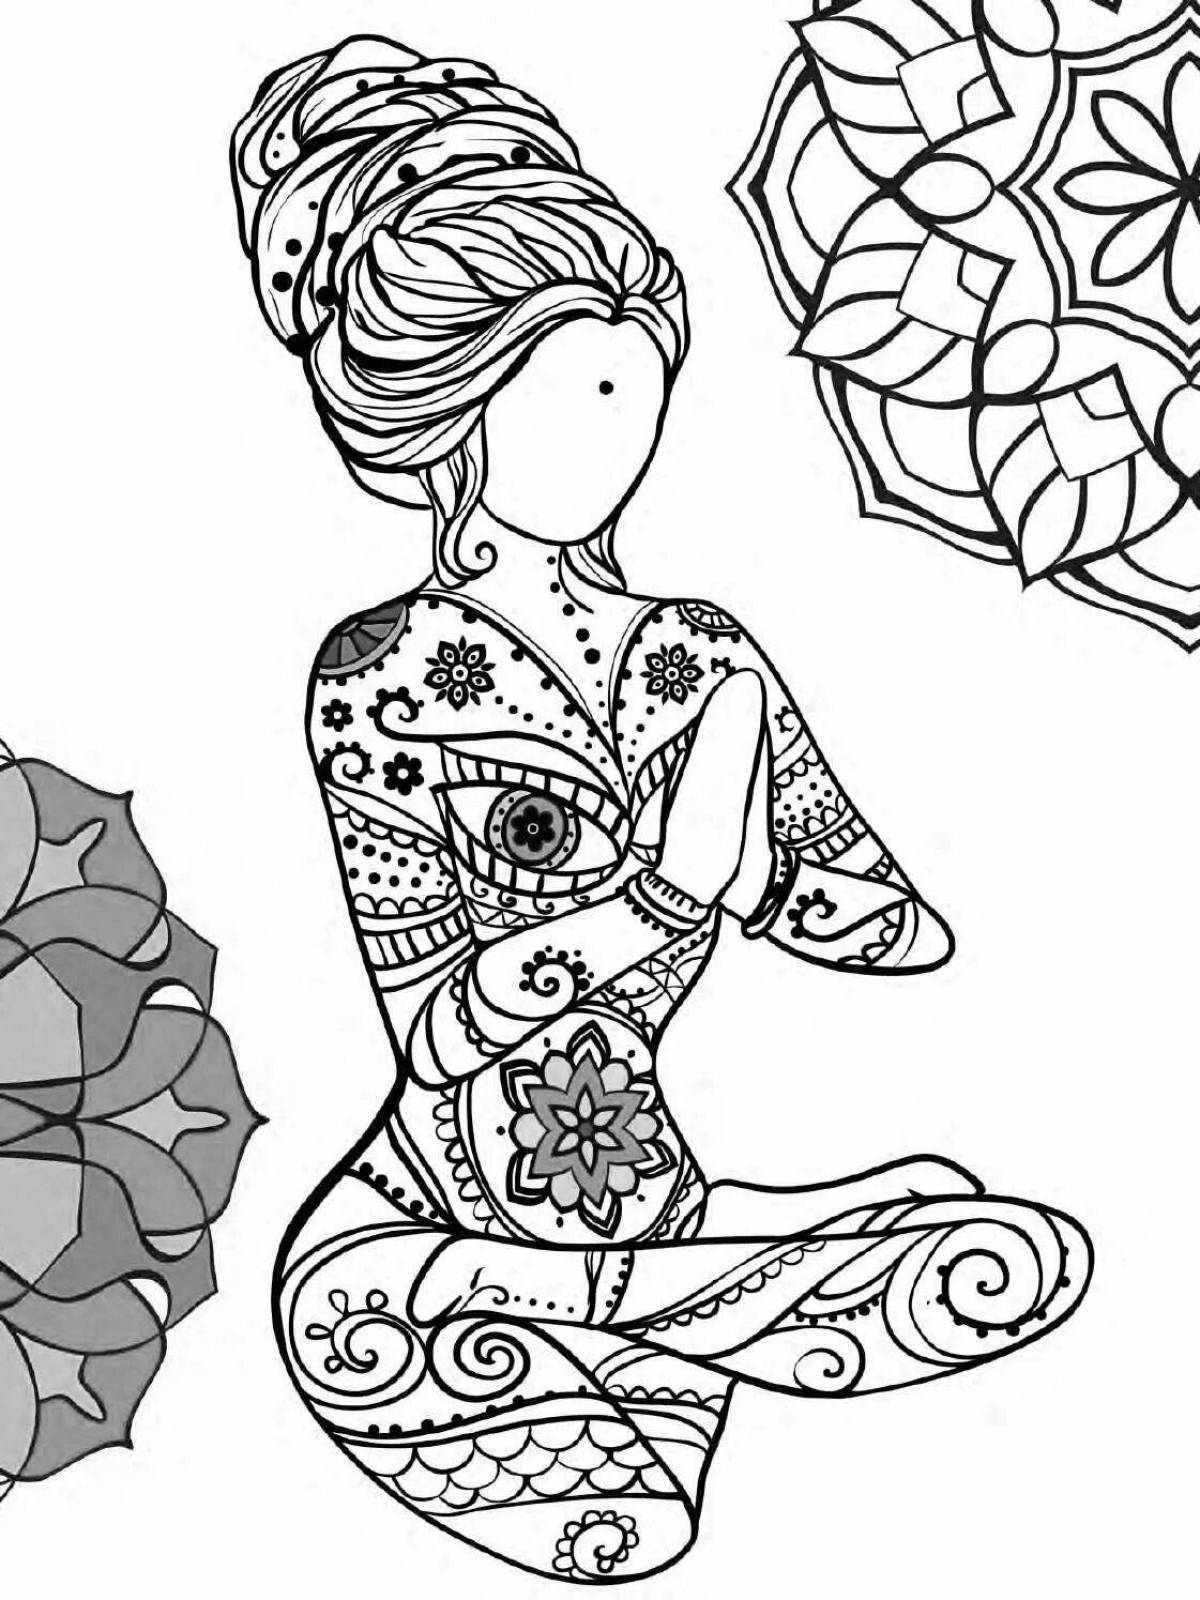 Joyful coloring book for meditation and relaxation